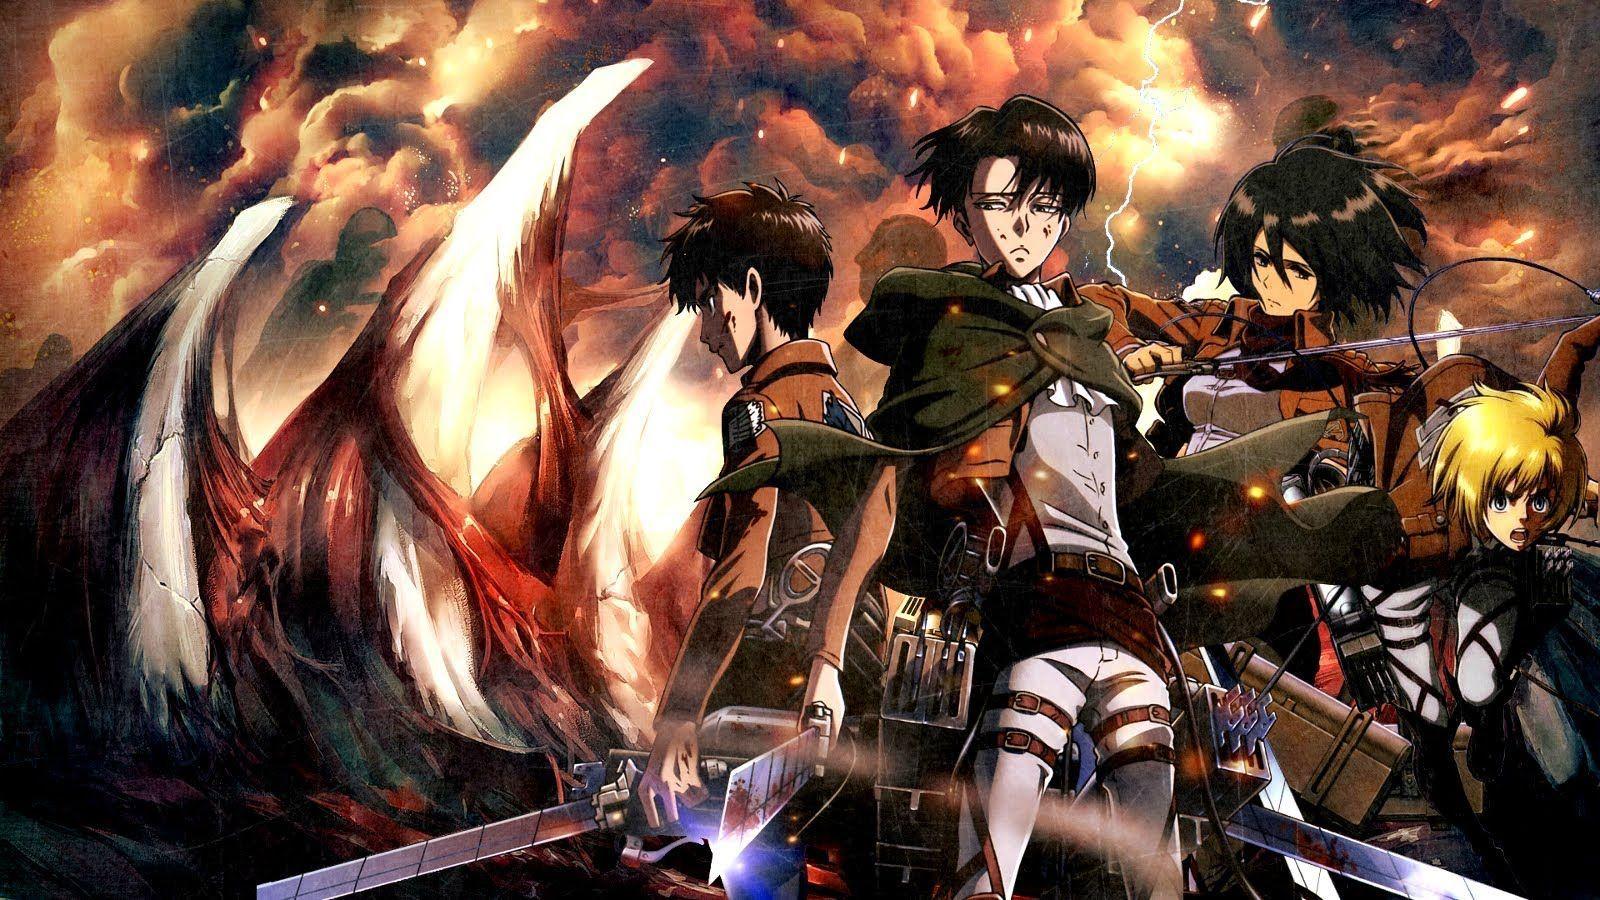 Attack On Titan 4k Wallpapers - Top Free Attack On Titan 4k Backgrounds ...